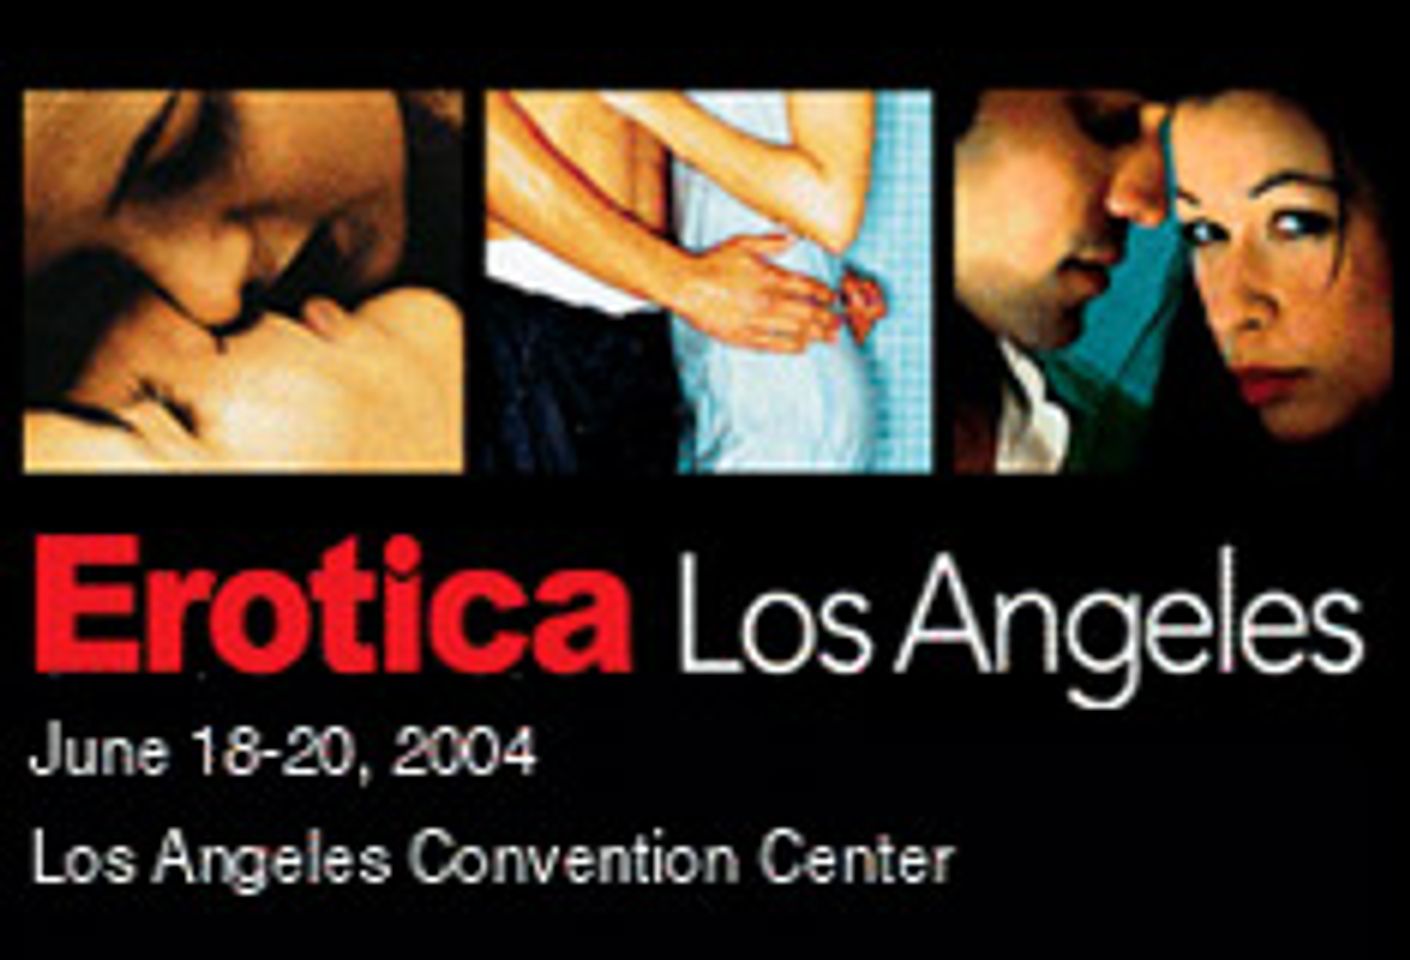 Erotica Los Angeles Offers Something for Everyone this Weekend